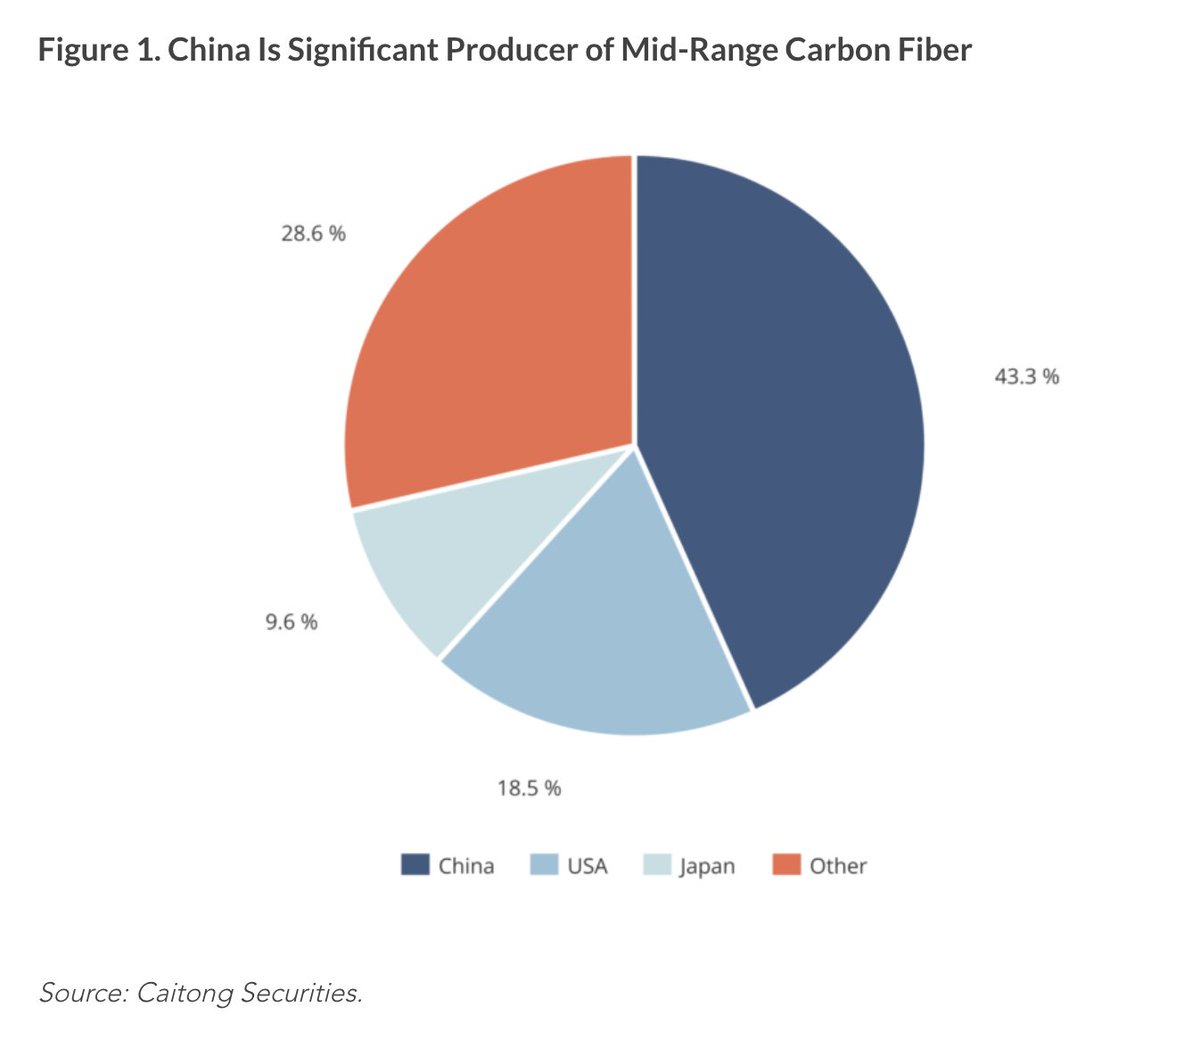 With China being a significant producer of the world's carbon fiber, the country plans on rivaling commercial grade carbon fiber aircrafts like Boeing and Airbus. @MacroPoloChina's @AJCortese_ covers what issues China may face in his latest commentary: macropolo.org/can-china-take…